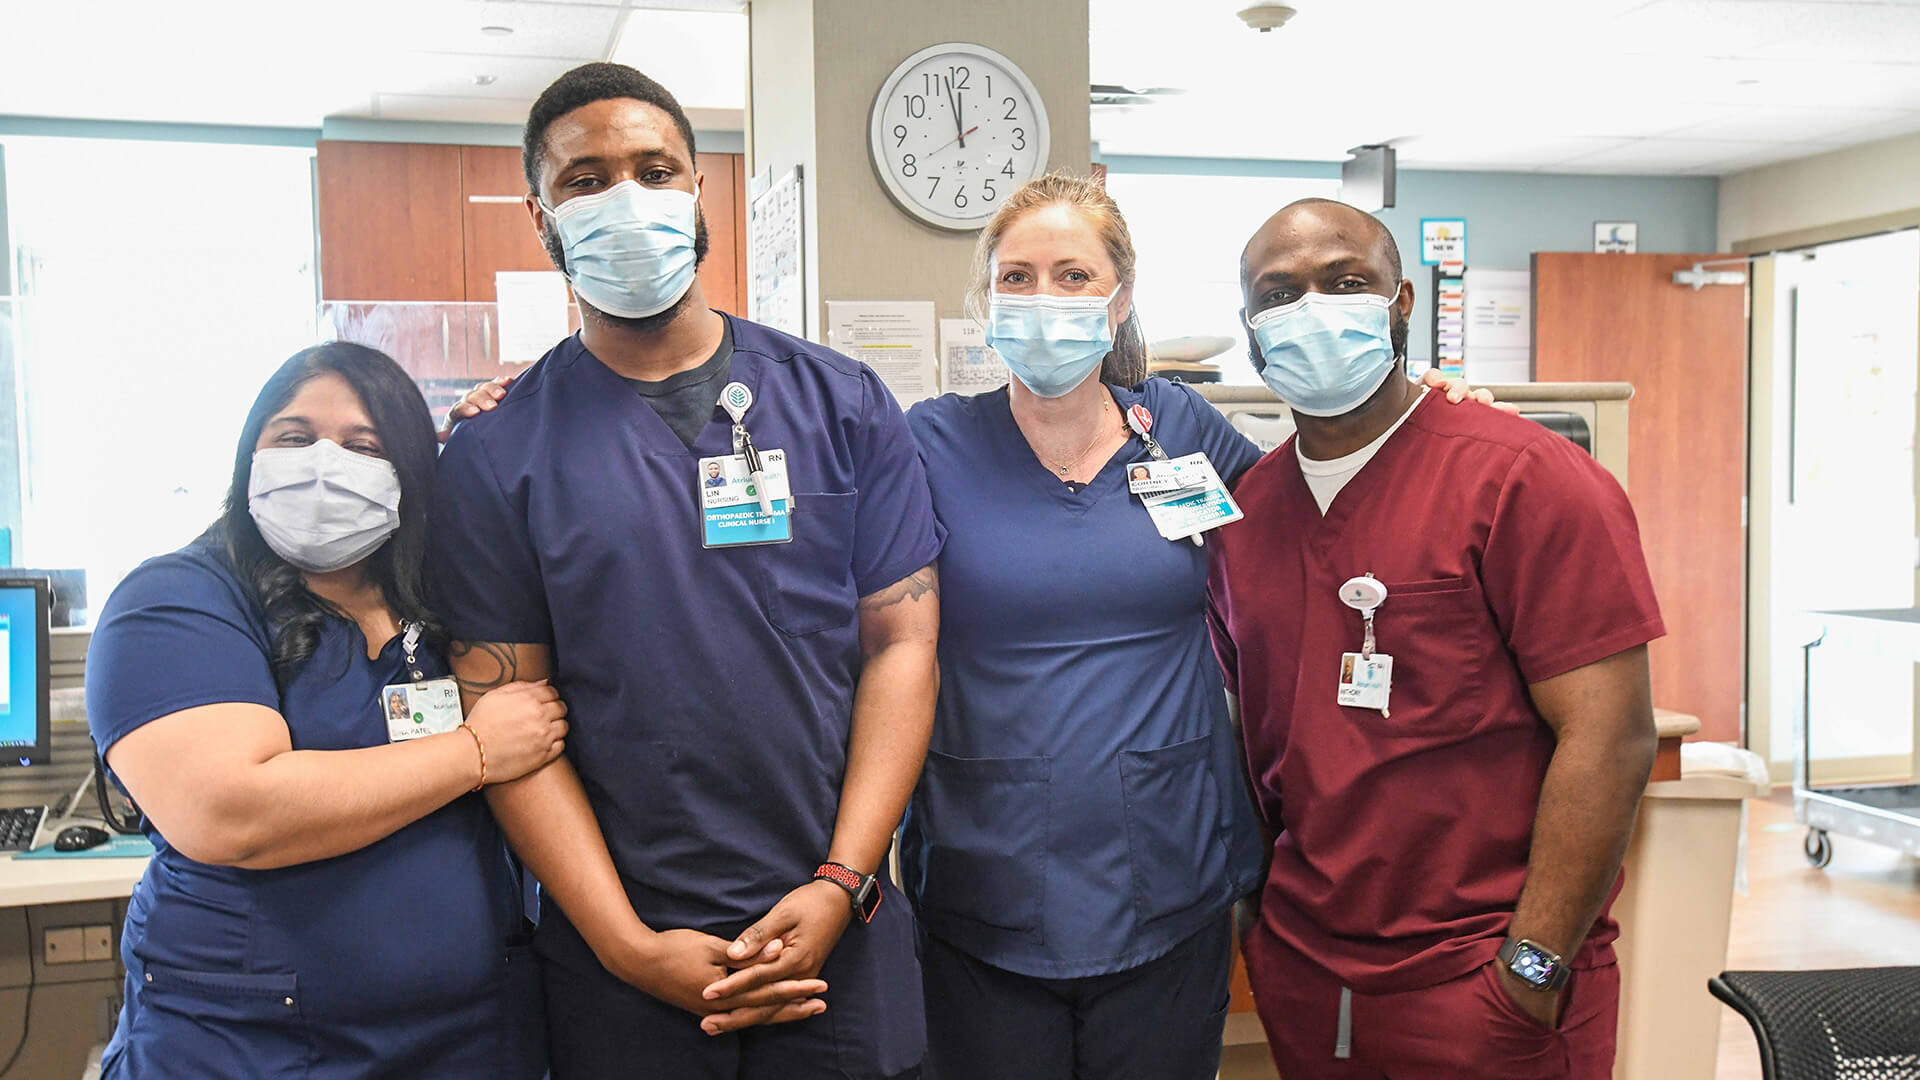 A group of nurses and hospital staff wearing masks. Three have blue scrubs and one has red scrubs.